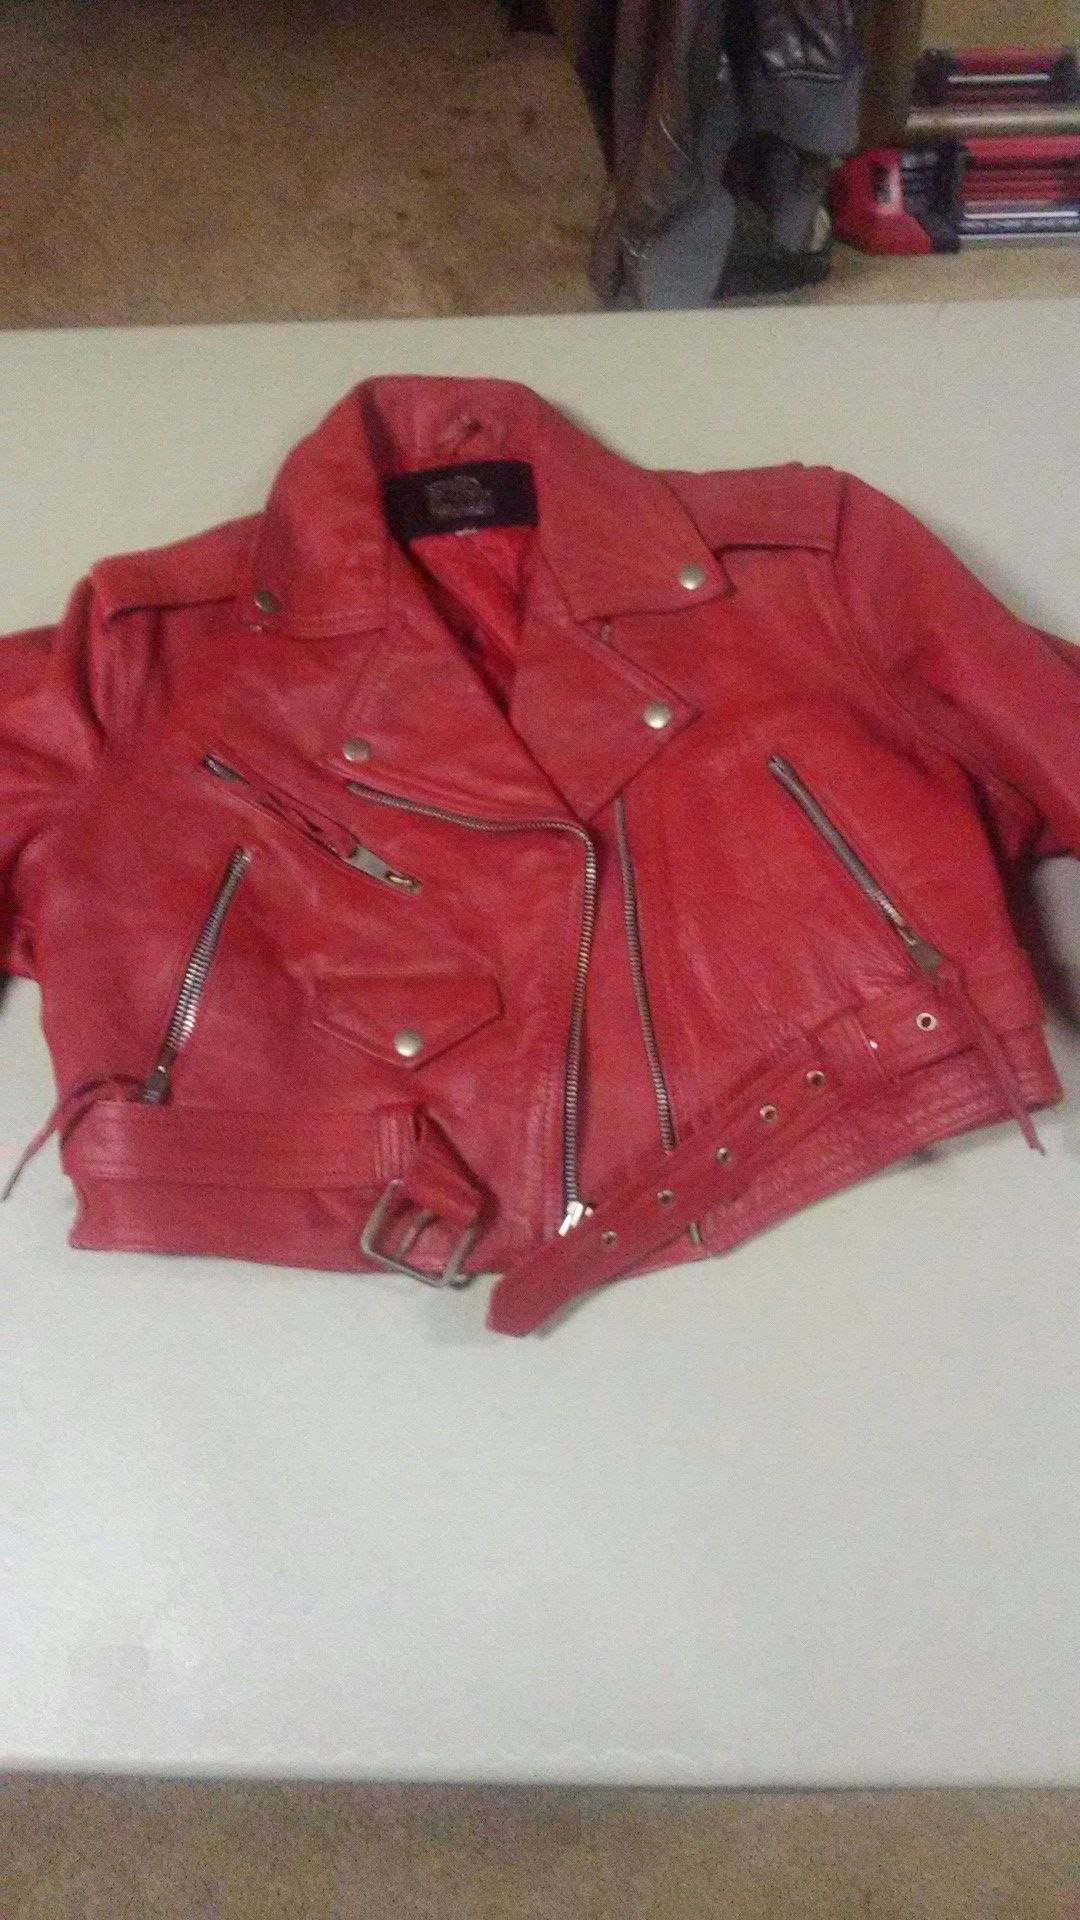 Red Leather jacket